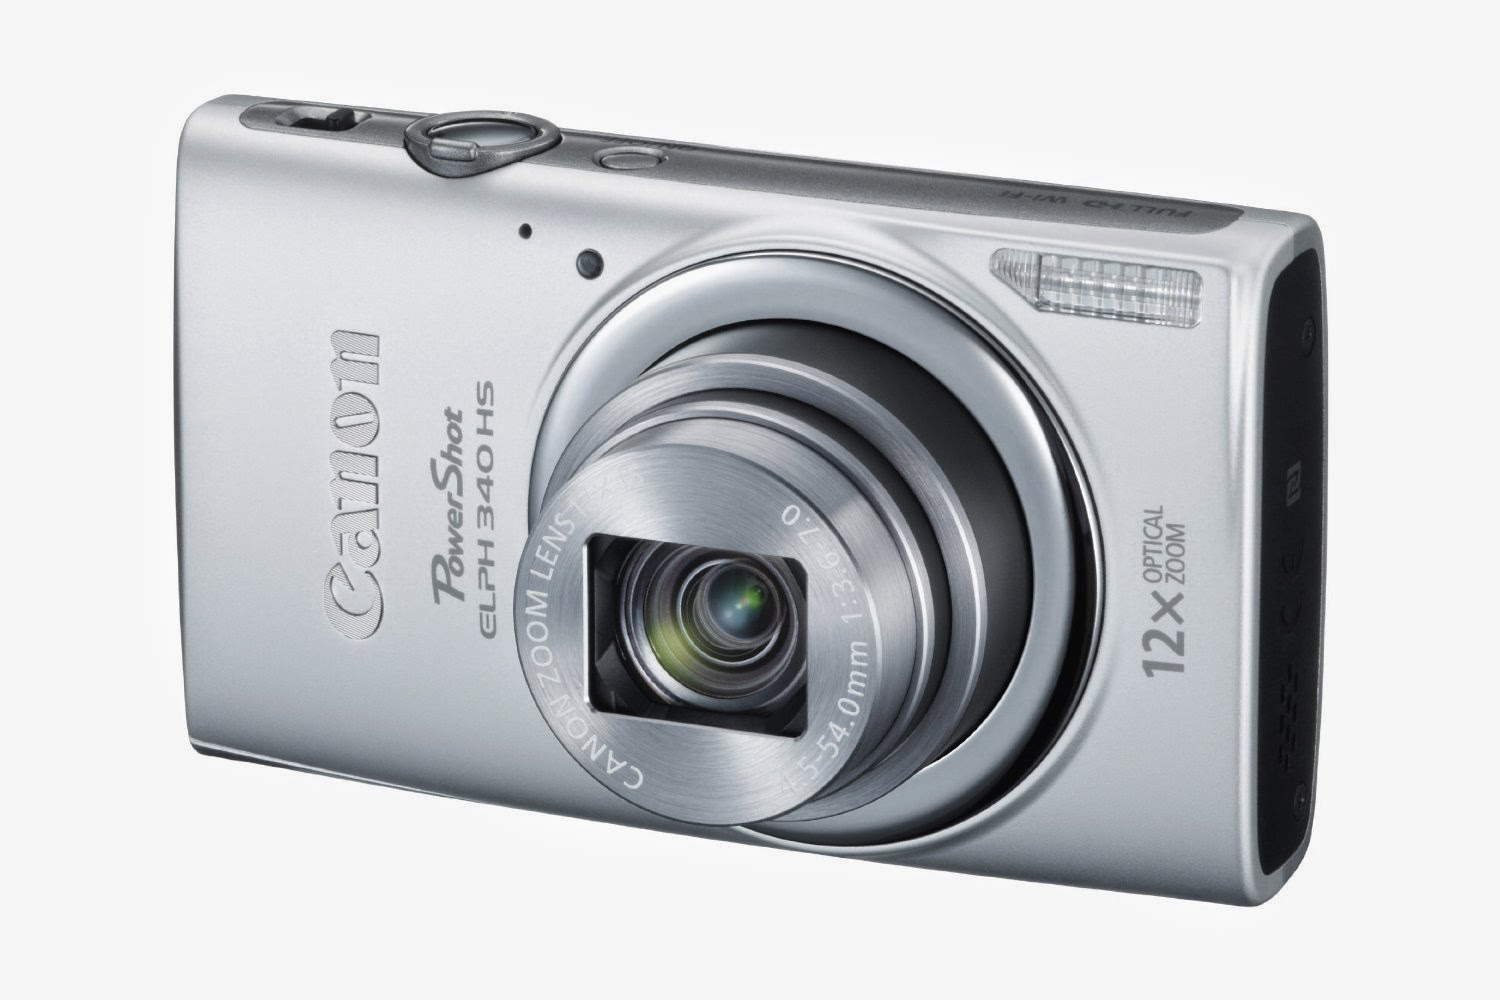 Canon PowerShot ELPH 340 HS 16 MP Digital Camera, silver, review, ultra compact, slim & lightweight digital camera with image stabilization, 12x optical zoom, ISO speeds up to 3200, DIGIC 4+ image processor, CMOS sensor